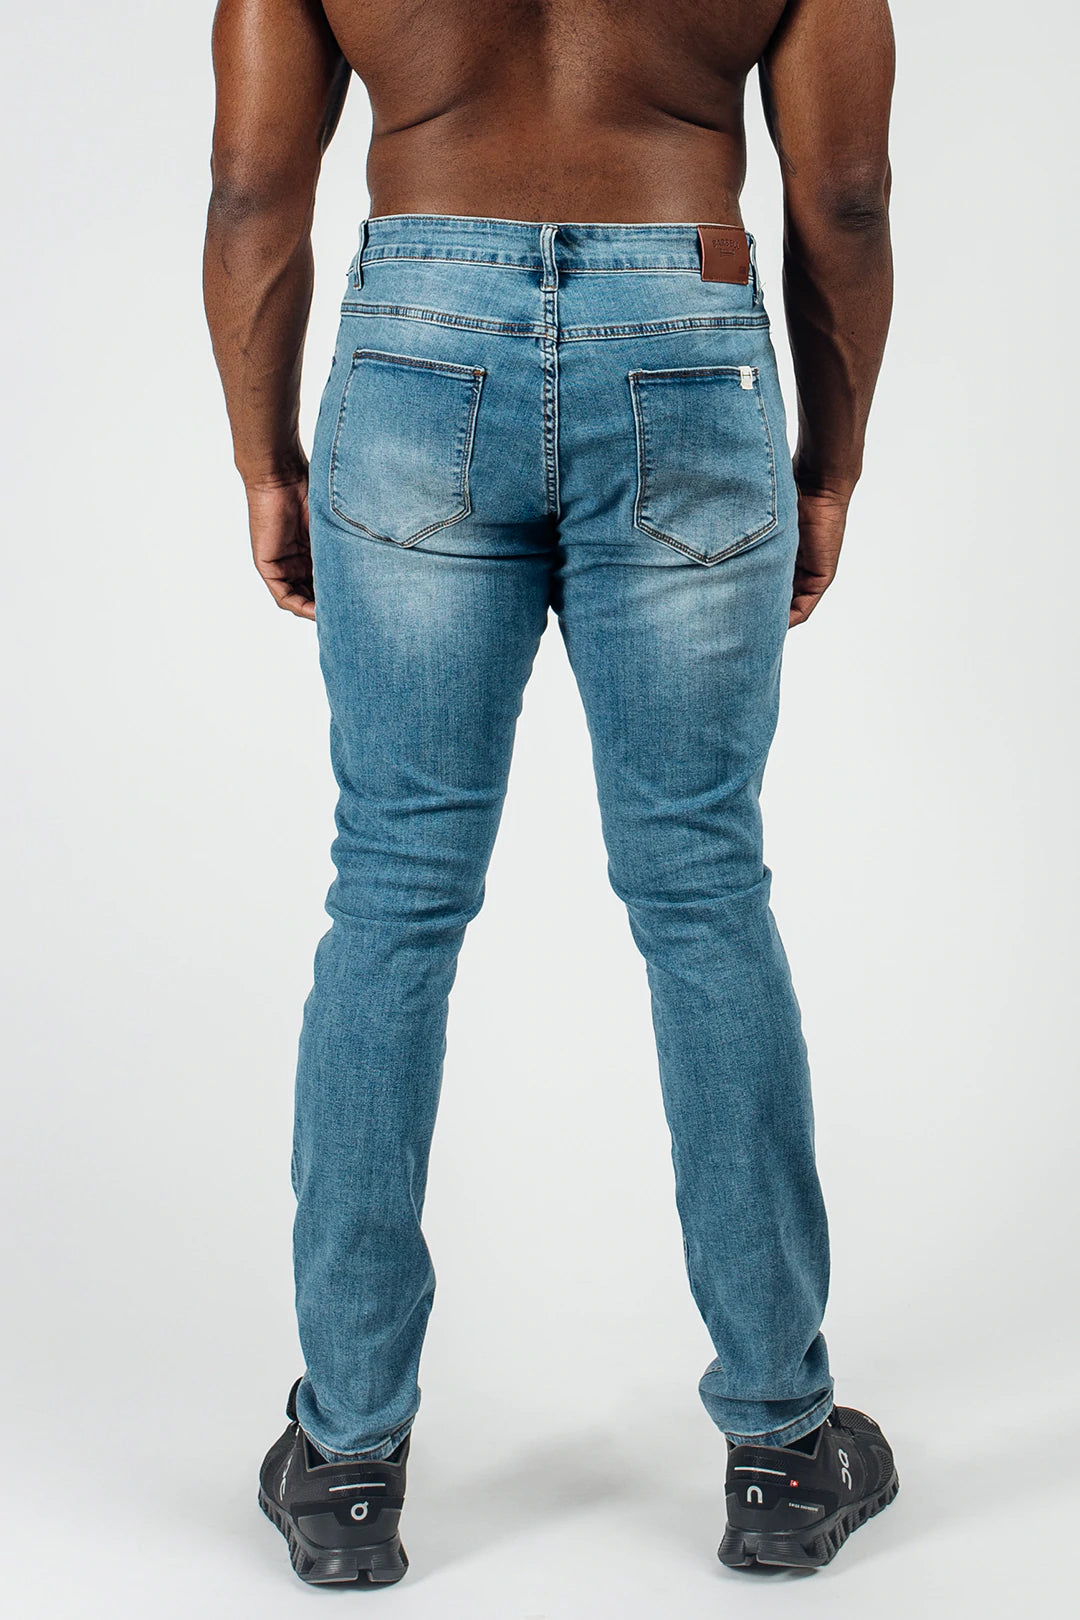 Slim Athletic Fit  - Light Distressed - photo from back #color_light-distressed